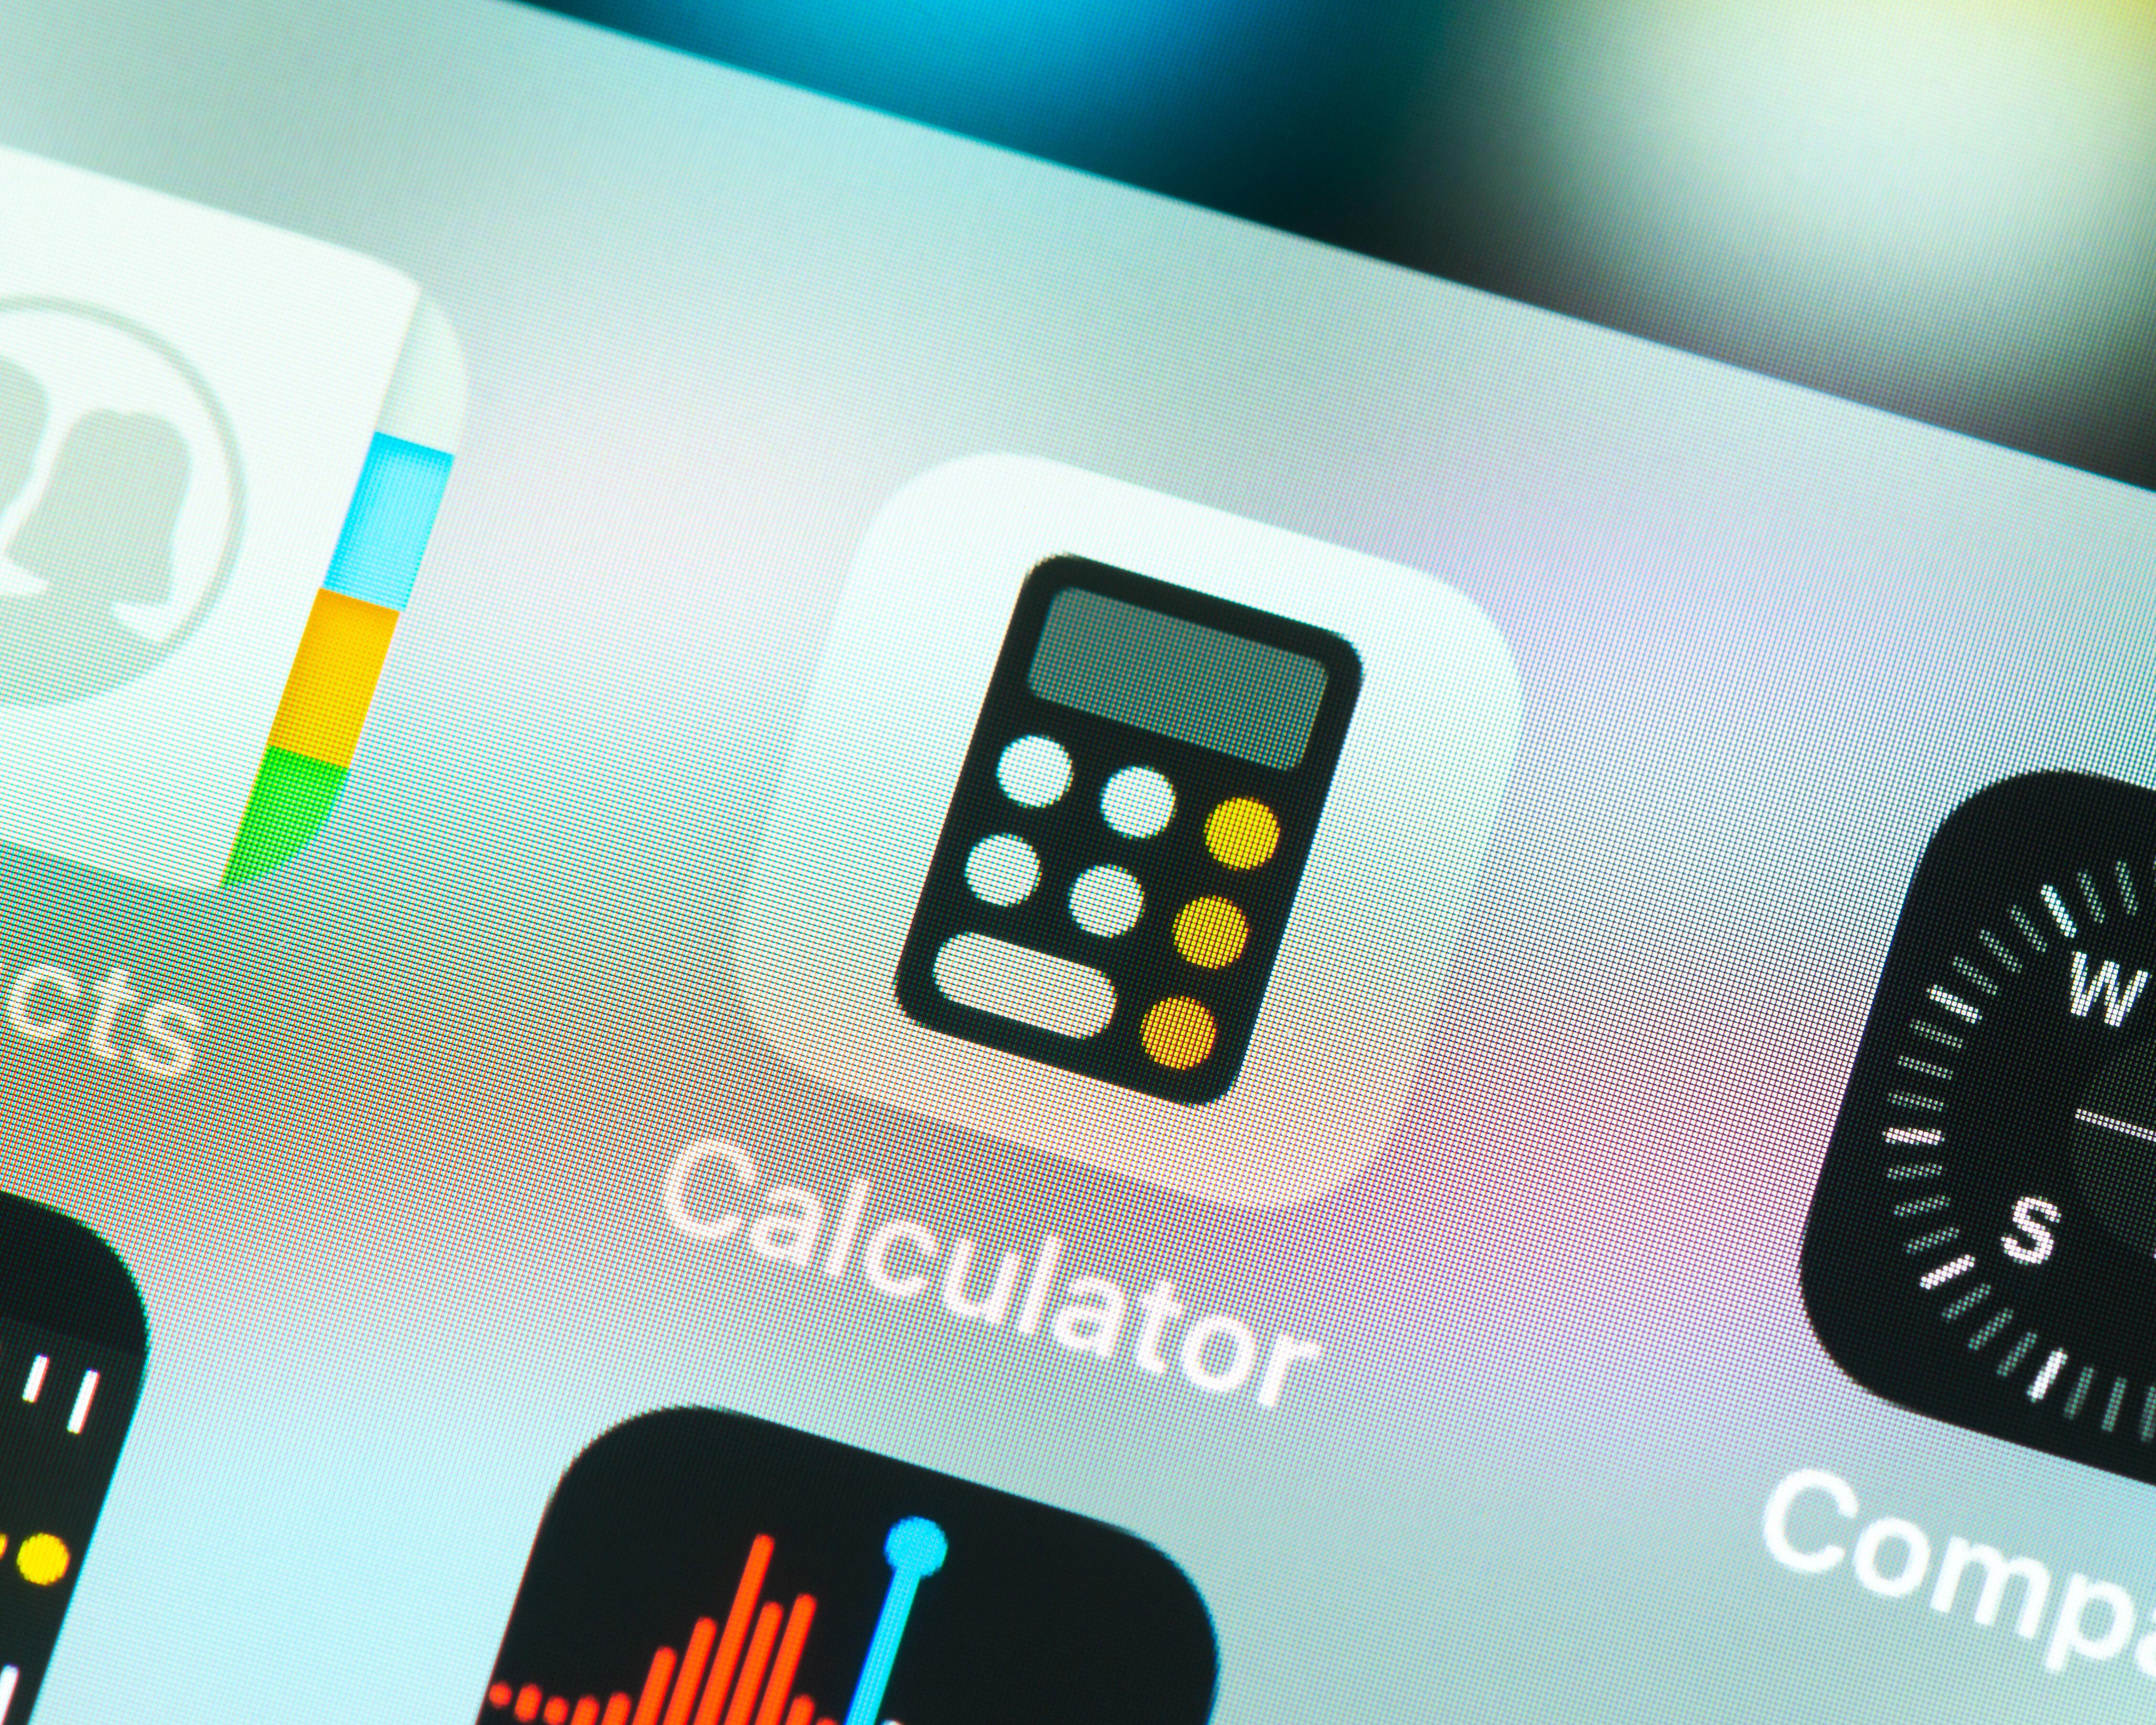 The stock iOS calculator has several tricks up its sleeve - PhoneArena